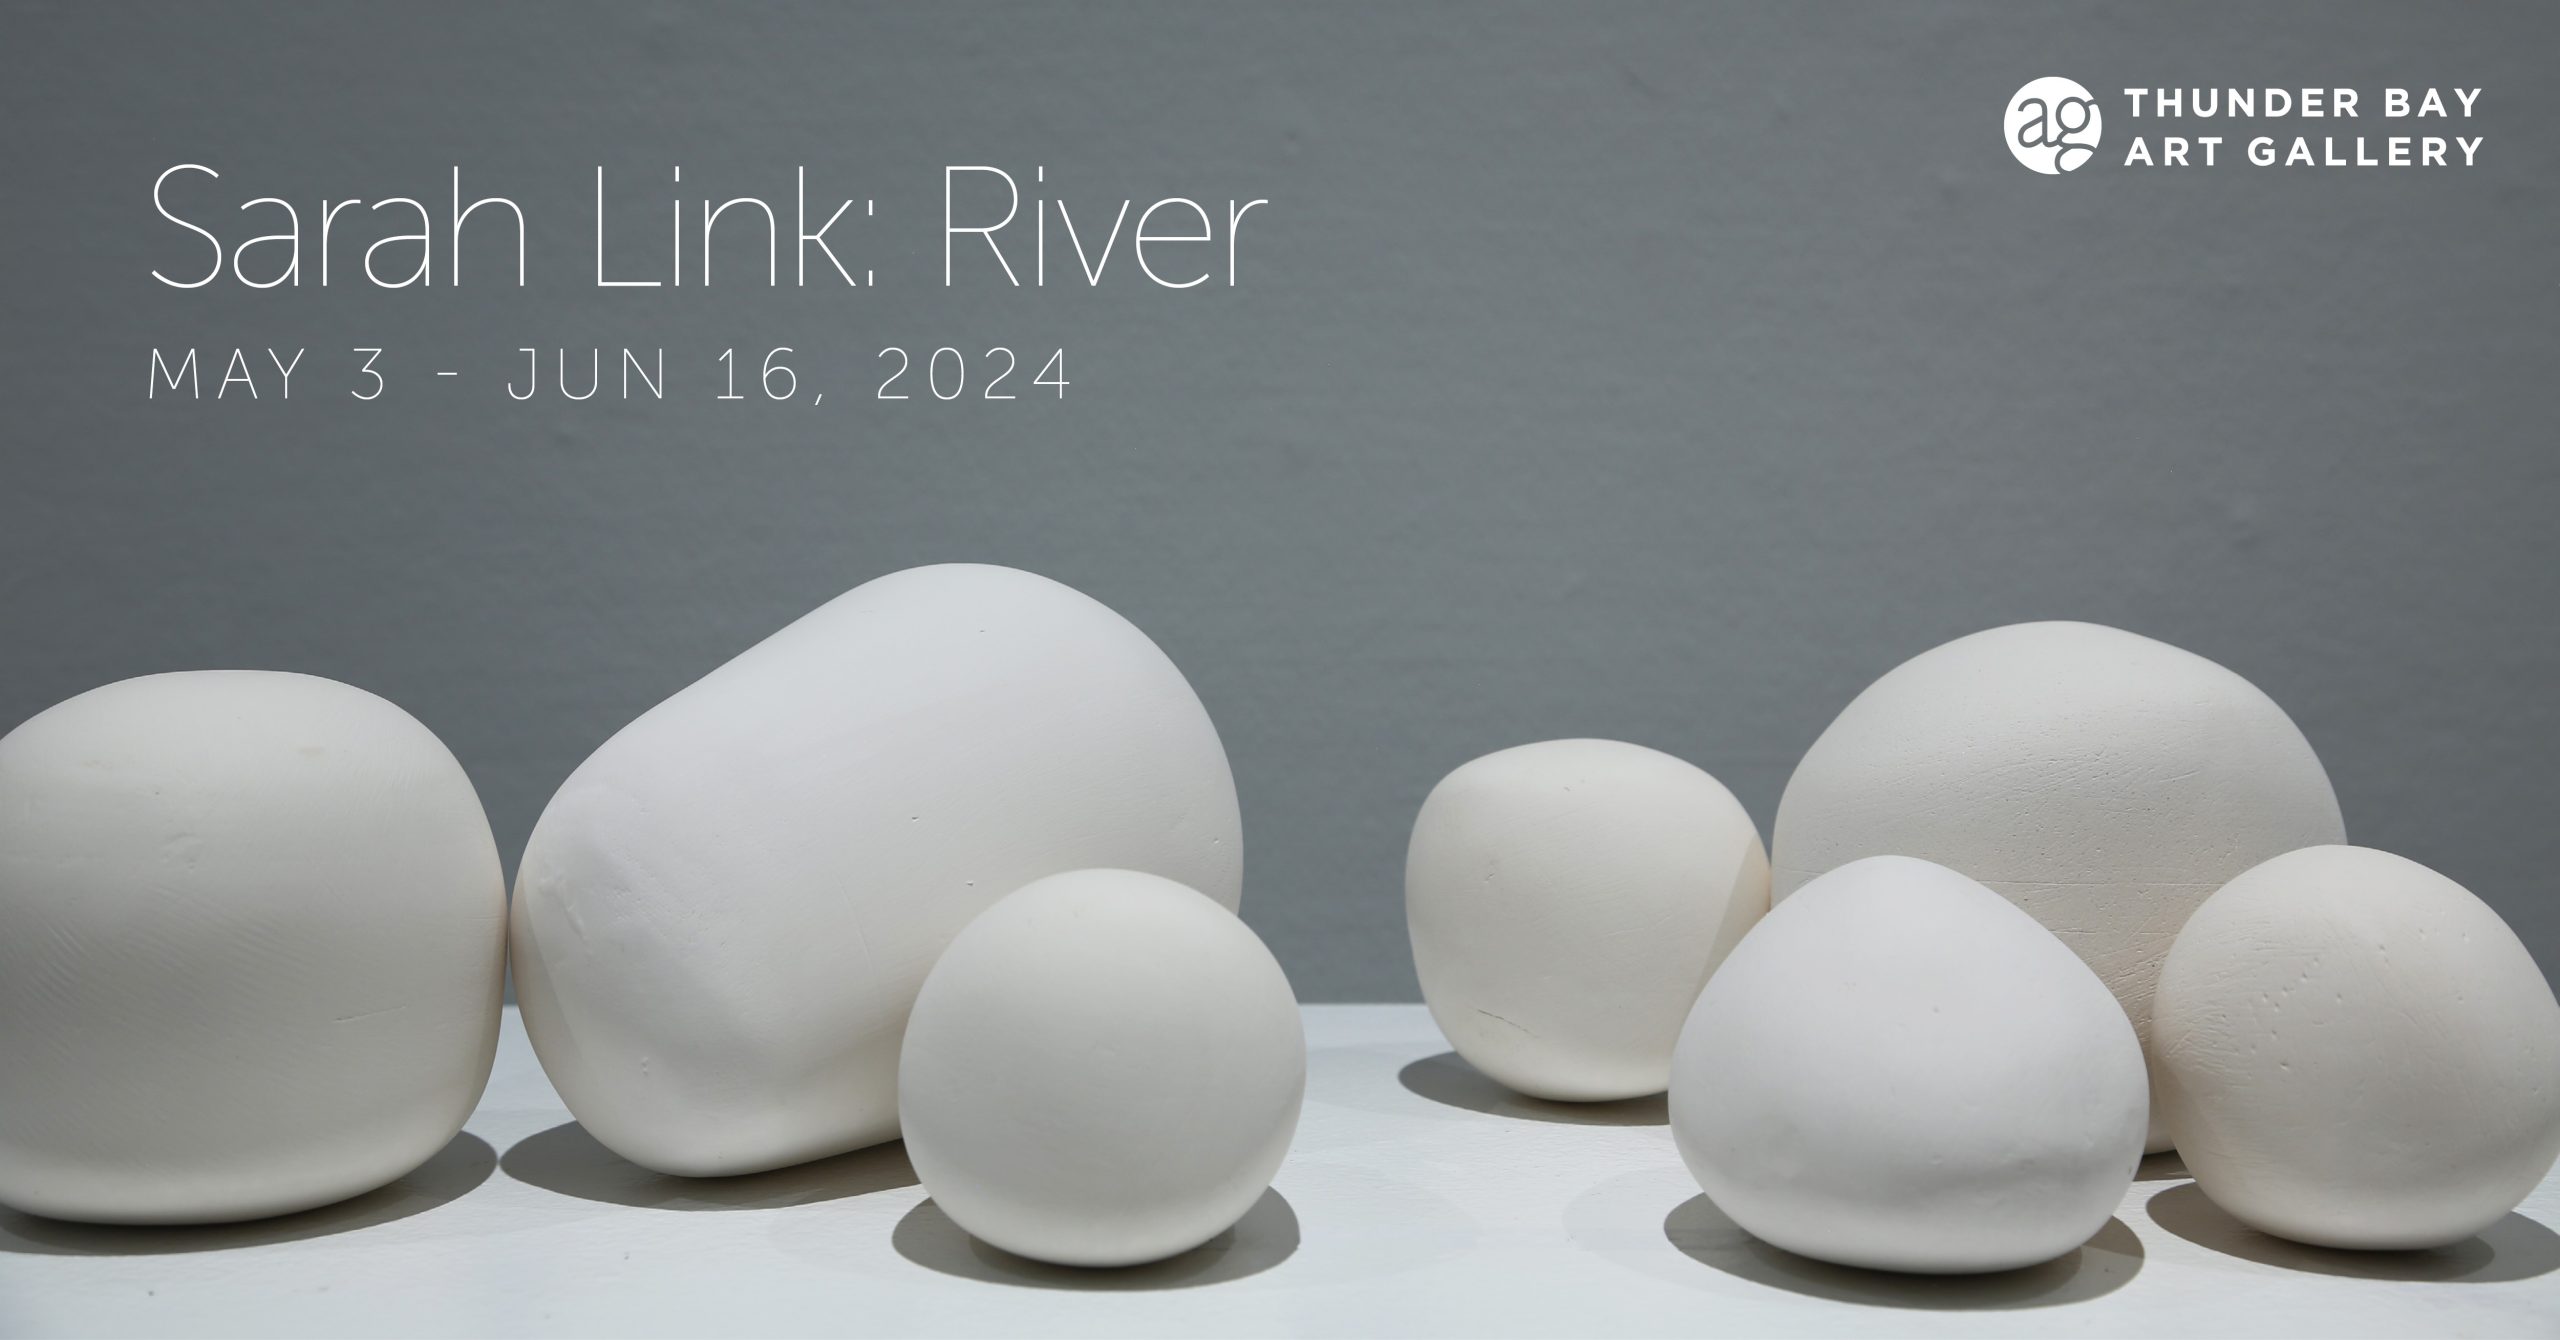 Thunder Bay Art Gallery Presents an Afternoon with Sara Link